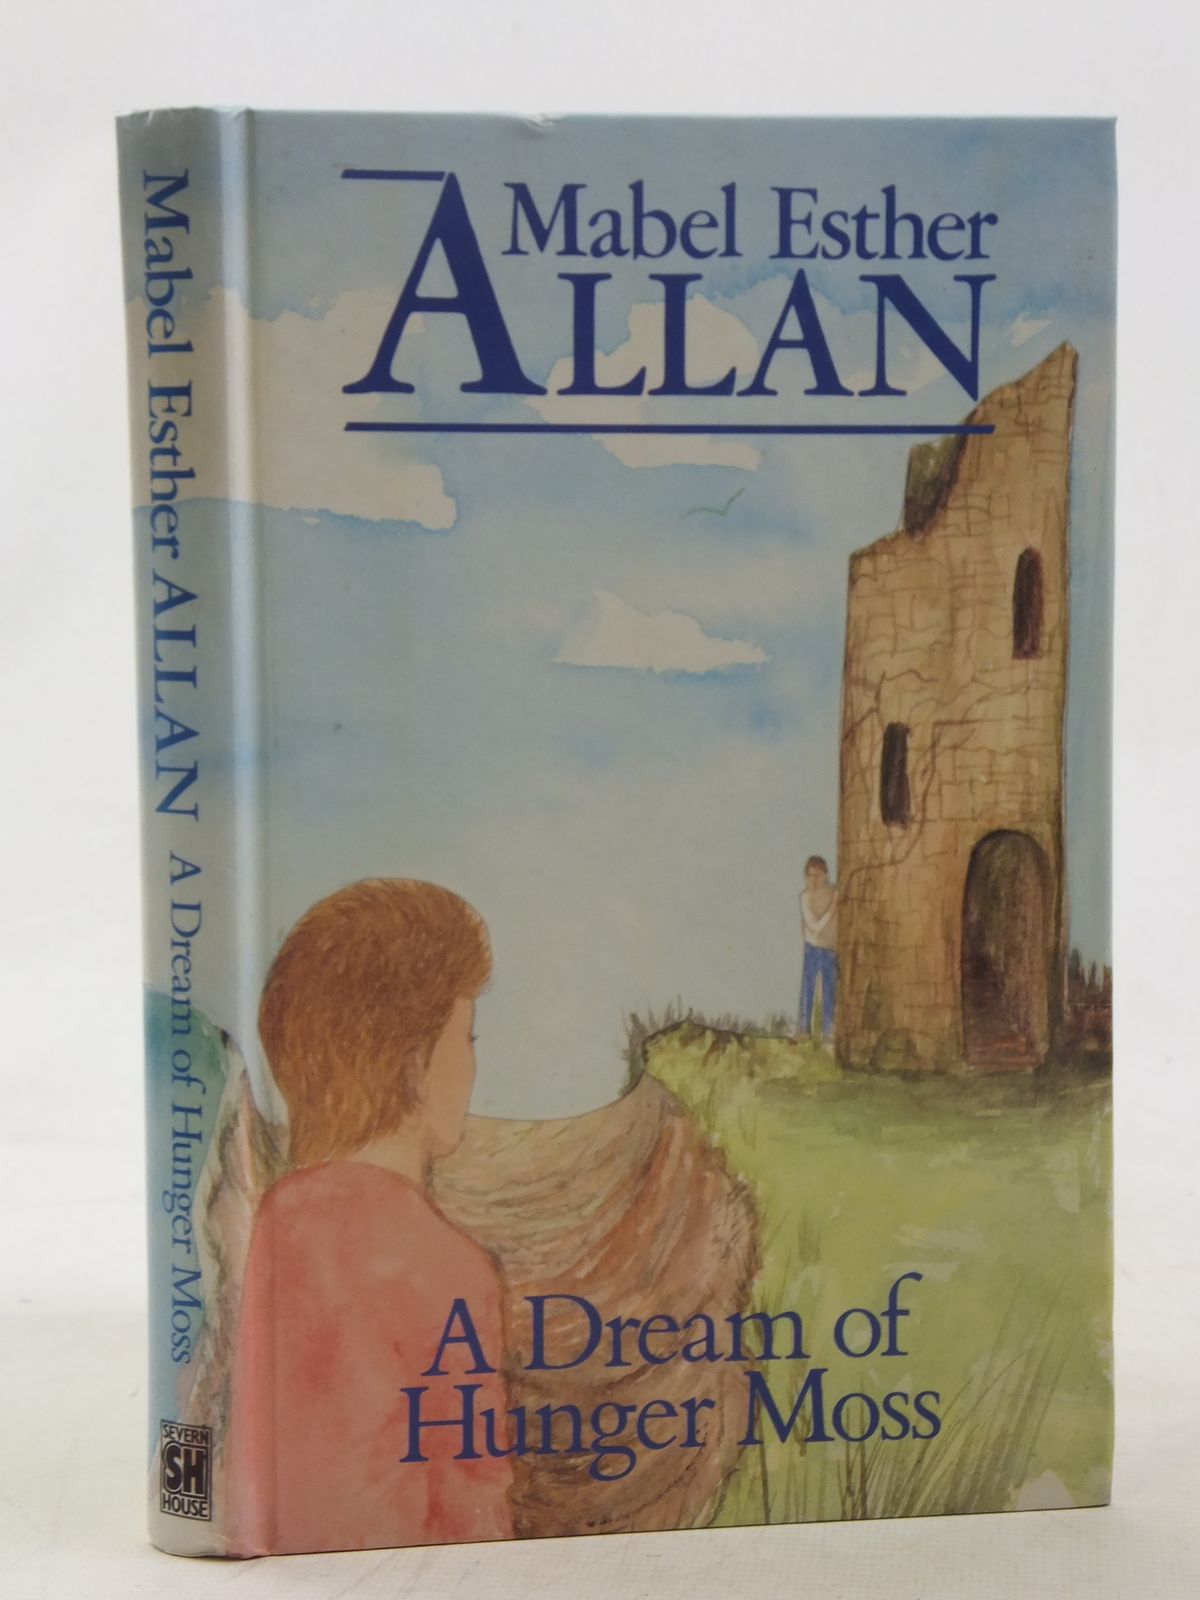 Cover of A DREAM OF HUNGER MOSS by Mabel Esther Allan